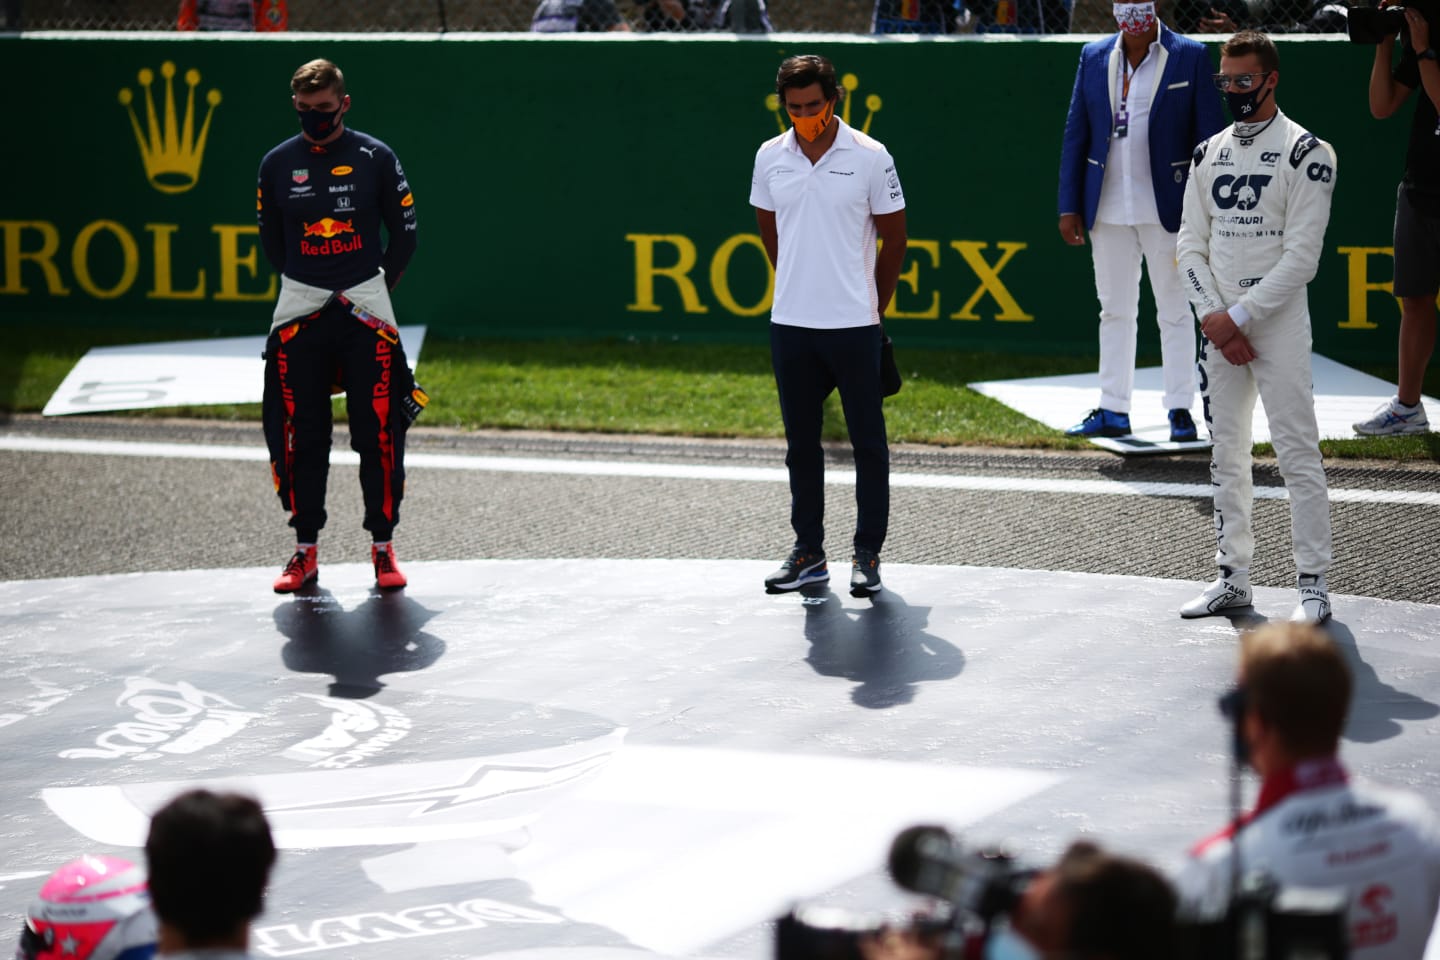 SPA, BELGIUM - AUGUST 30: Max Verstappen of Netherlands and Red Bull Racing, Carlos Sainz of Spain and McLaren F1 and Daniil Kvyat of Russia and Scuderia AlphaTauri take part in a minute of silence in tribute to the late Anthoine Hubert before the F1 Grand Prix of Belgium at Circuit de Spa-Francorchamps on August 30, 2020 in Spa, Belgium. (Photo by Peter Fox/Getty Images)